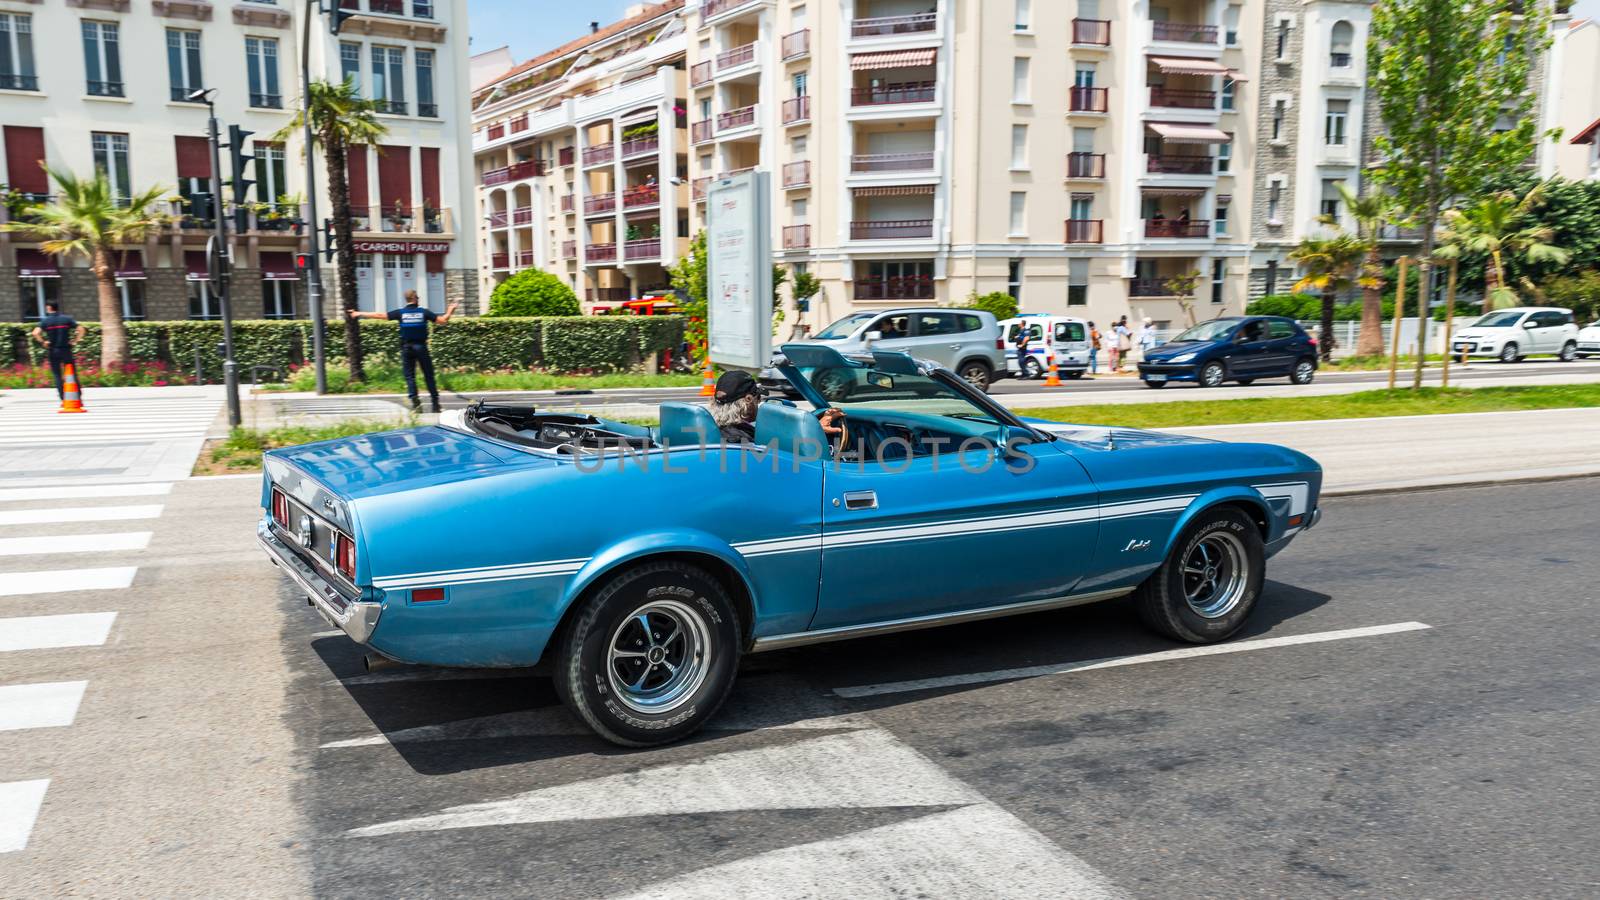 Ford Mustang Convertible in Bayonne, France by dutourdumonde